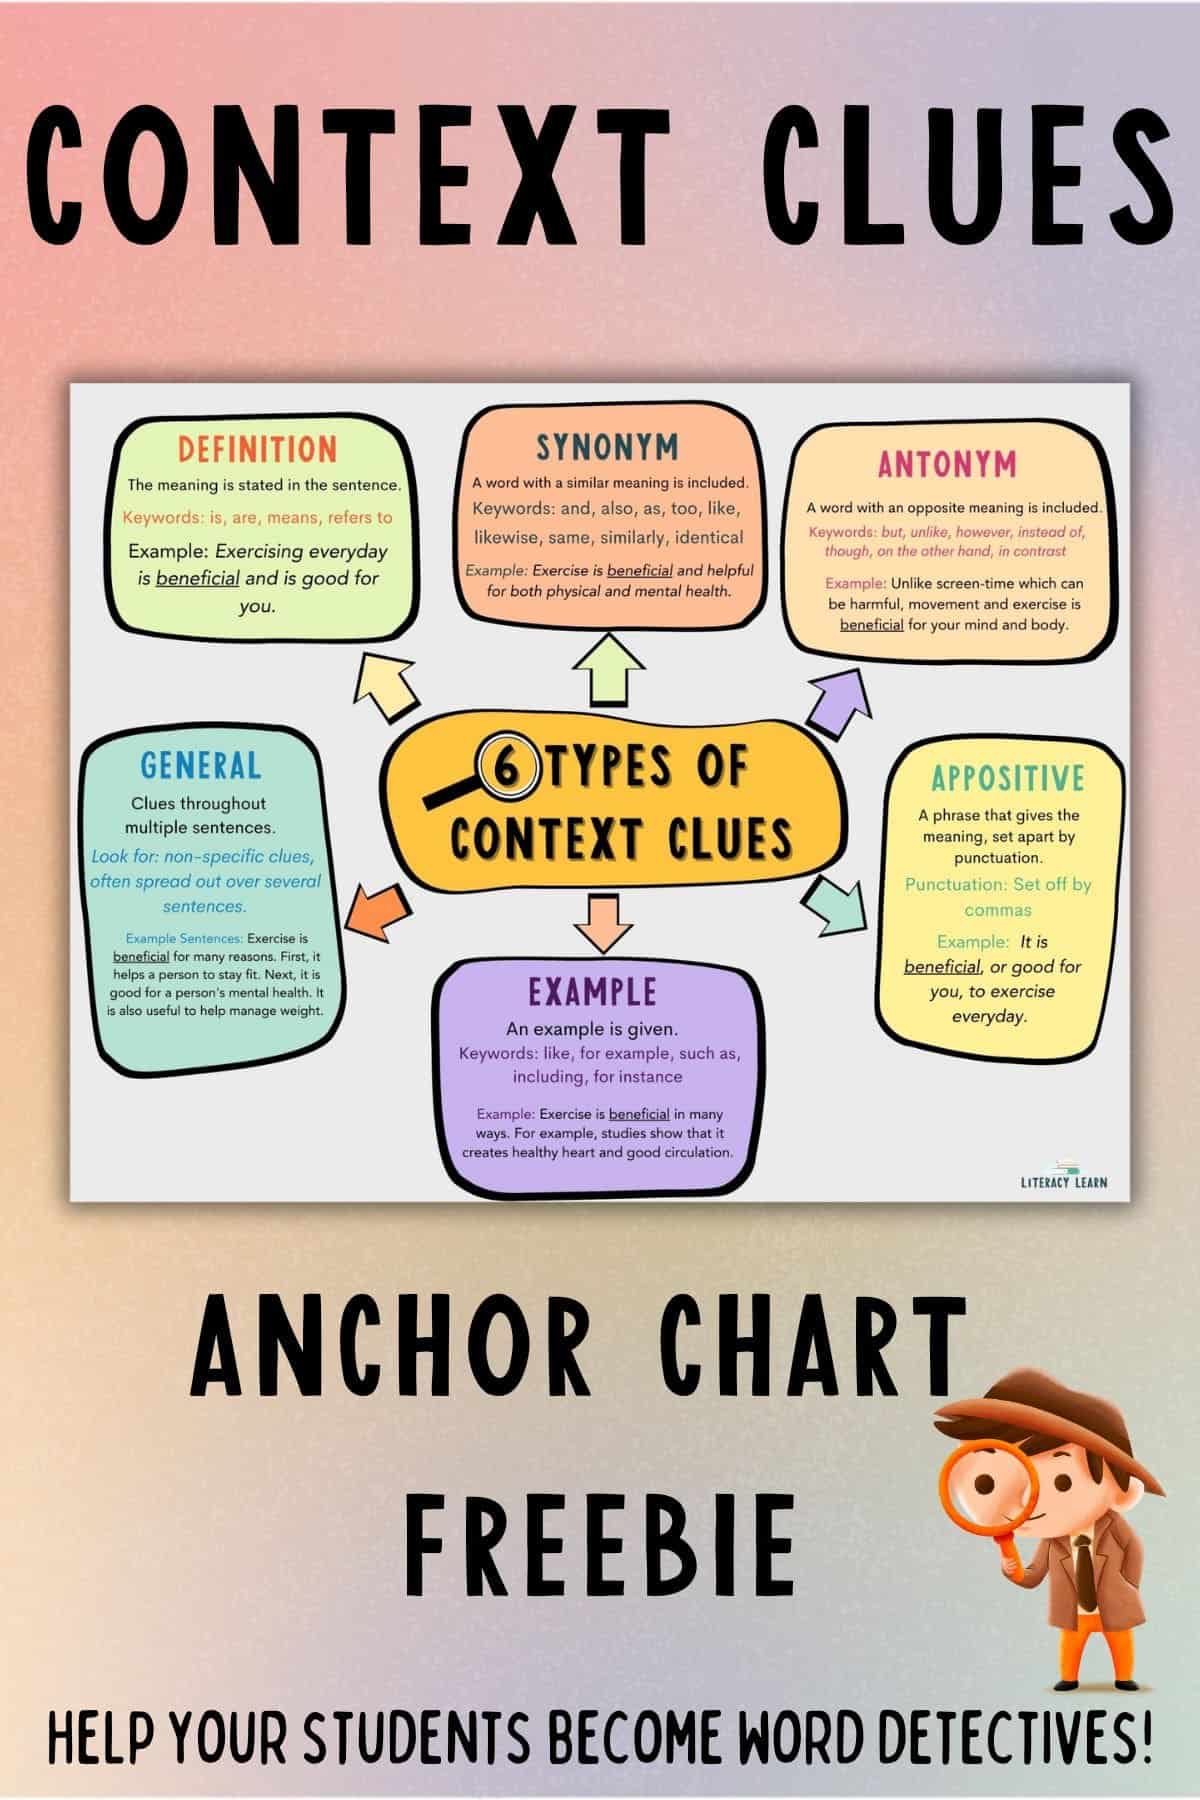 Title "Context Clues Anchor Chart Freebie" with image of the chart and a clipart detective. 